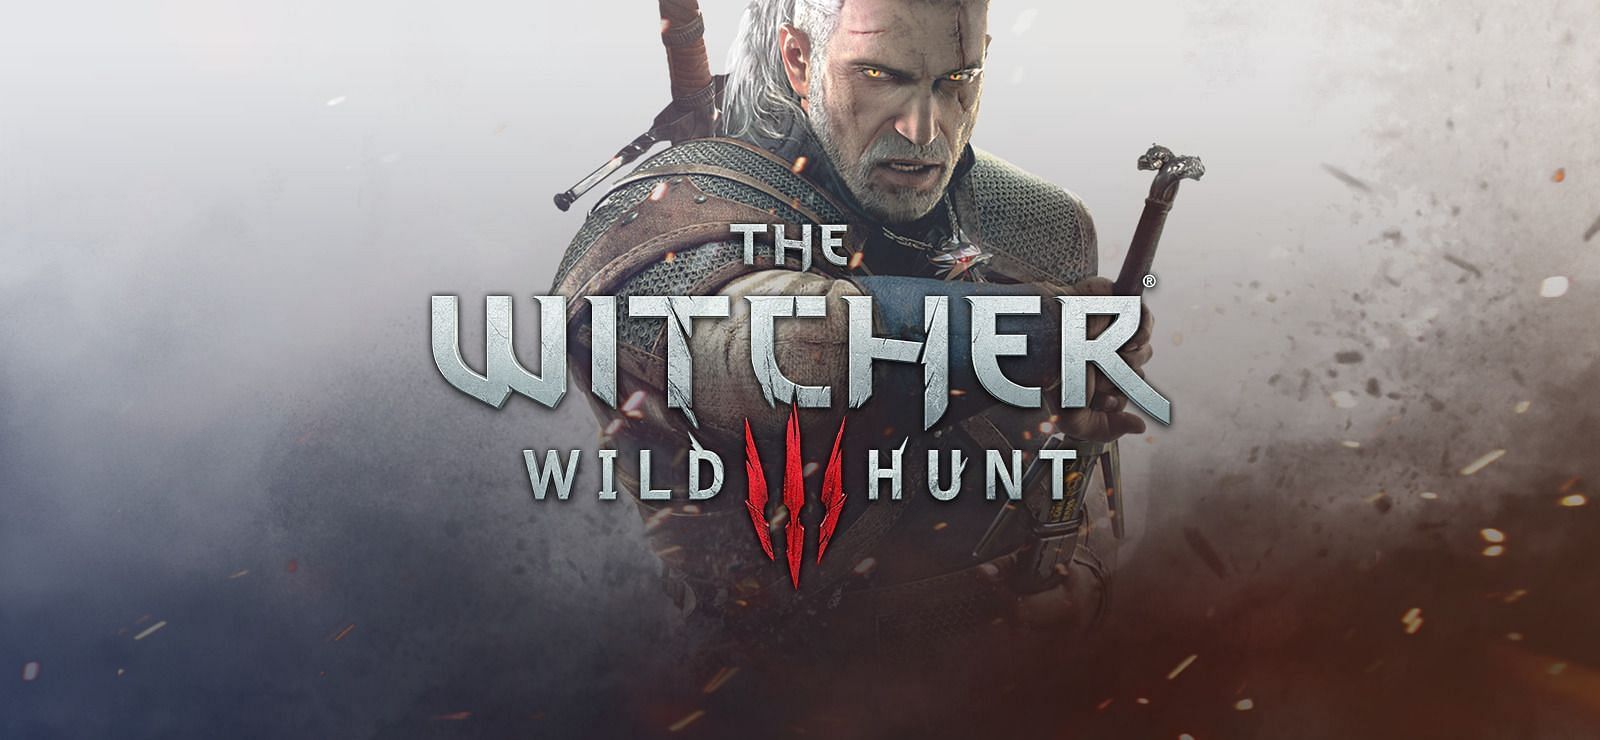 The Witcher 3 (Image via CD Projekt Red)